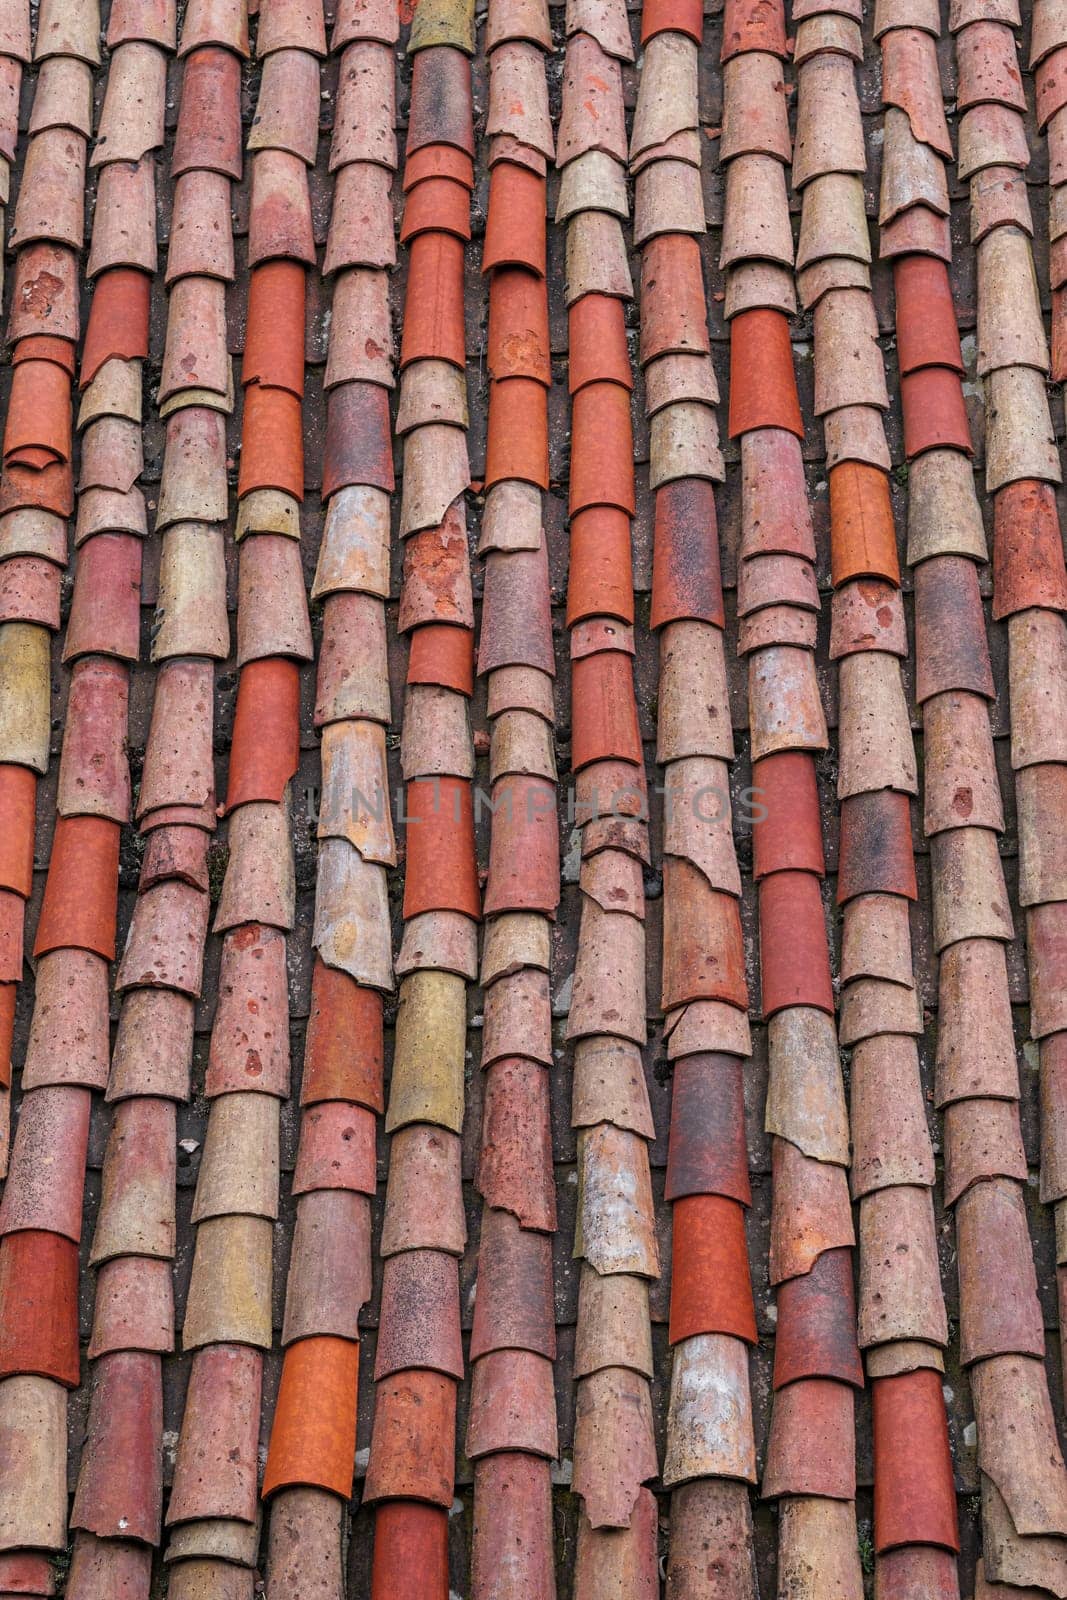 Vertical roof tiles of an old house in a village